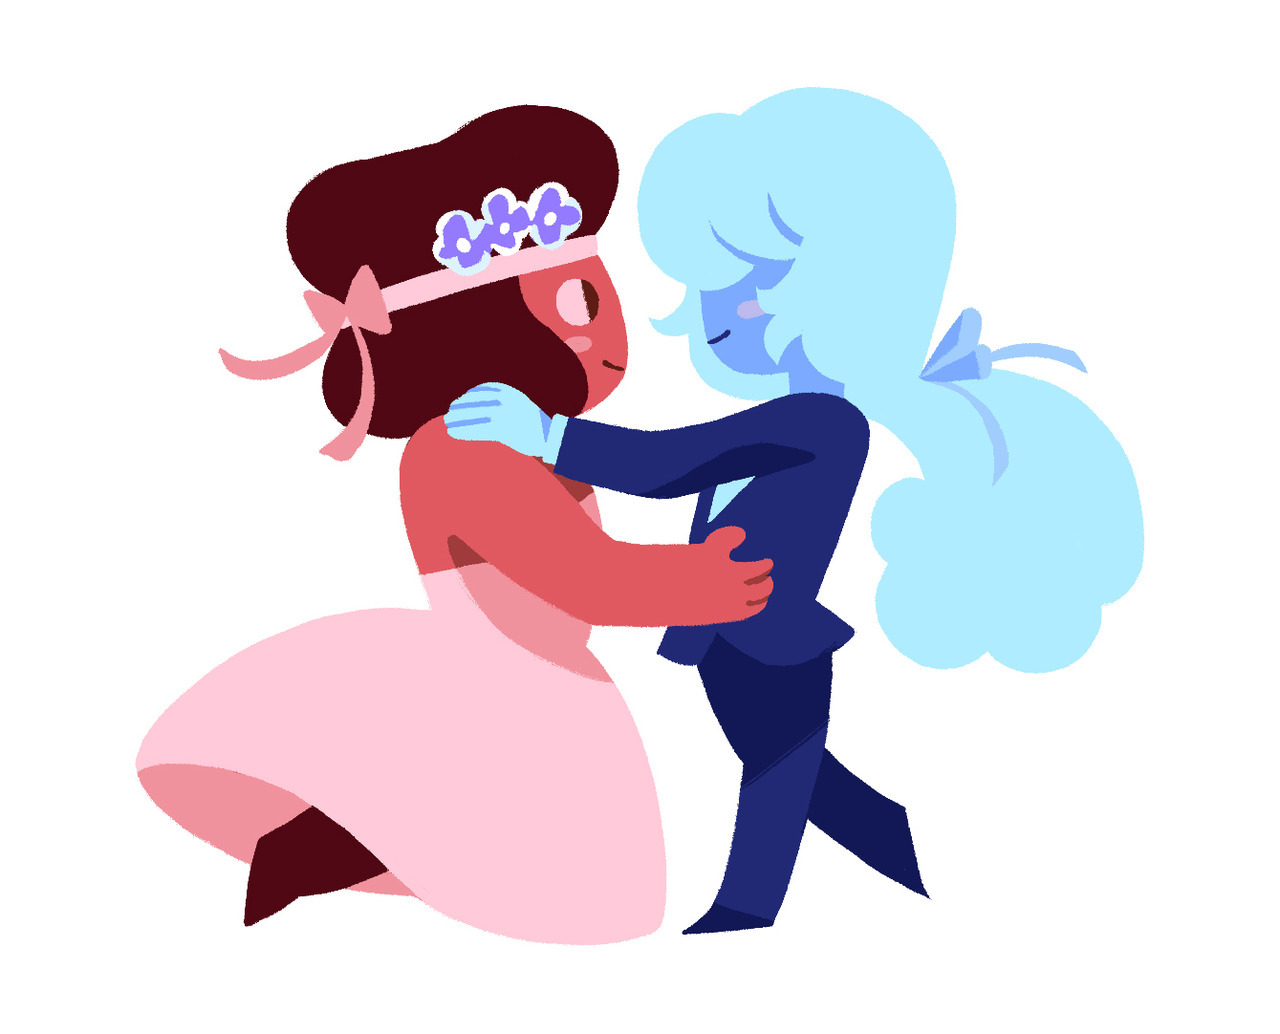 I’m still thinking about this episode and the one before it!! Thank you for the gay rocks, Rebecca Sugar.